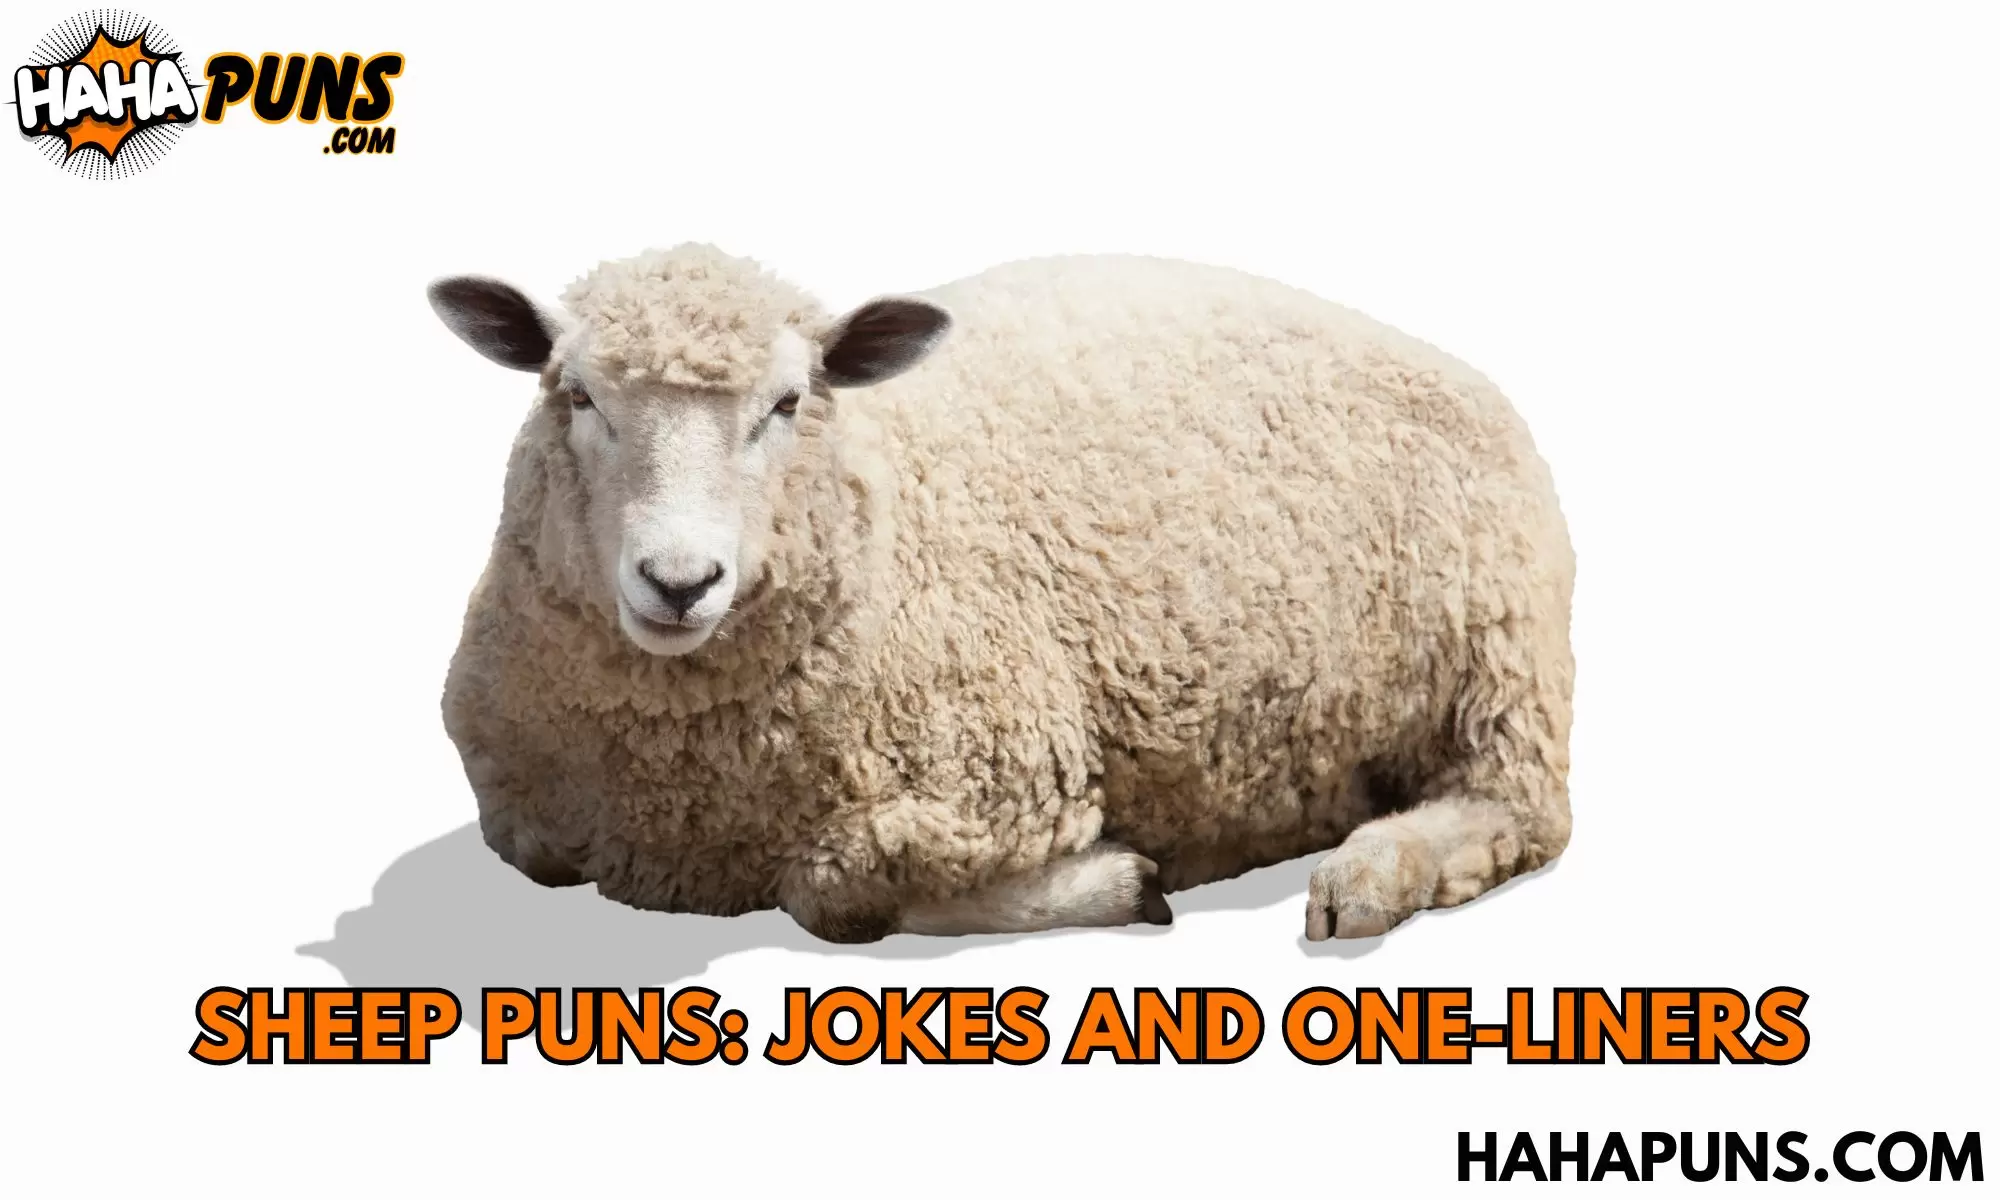 Sheep Puns: Jokes And One-Liners